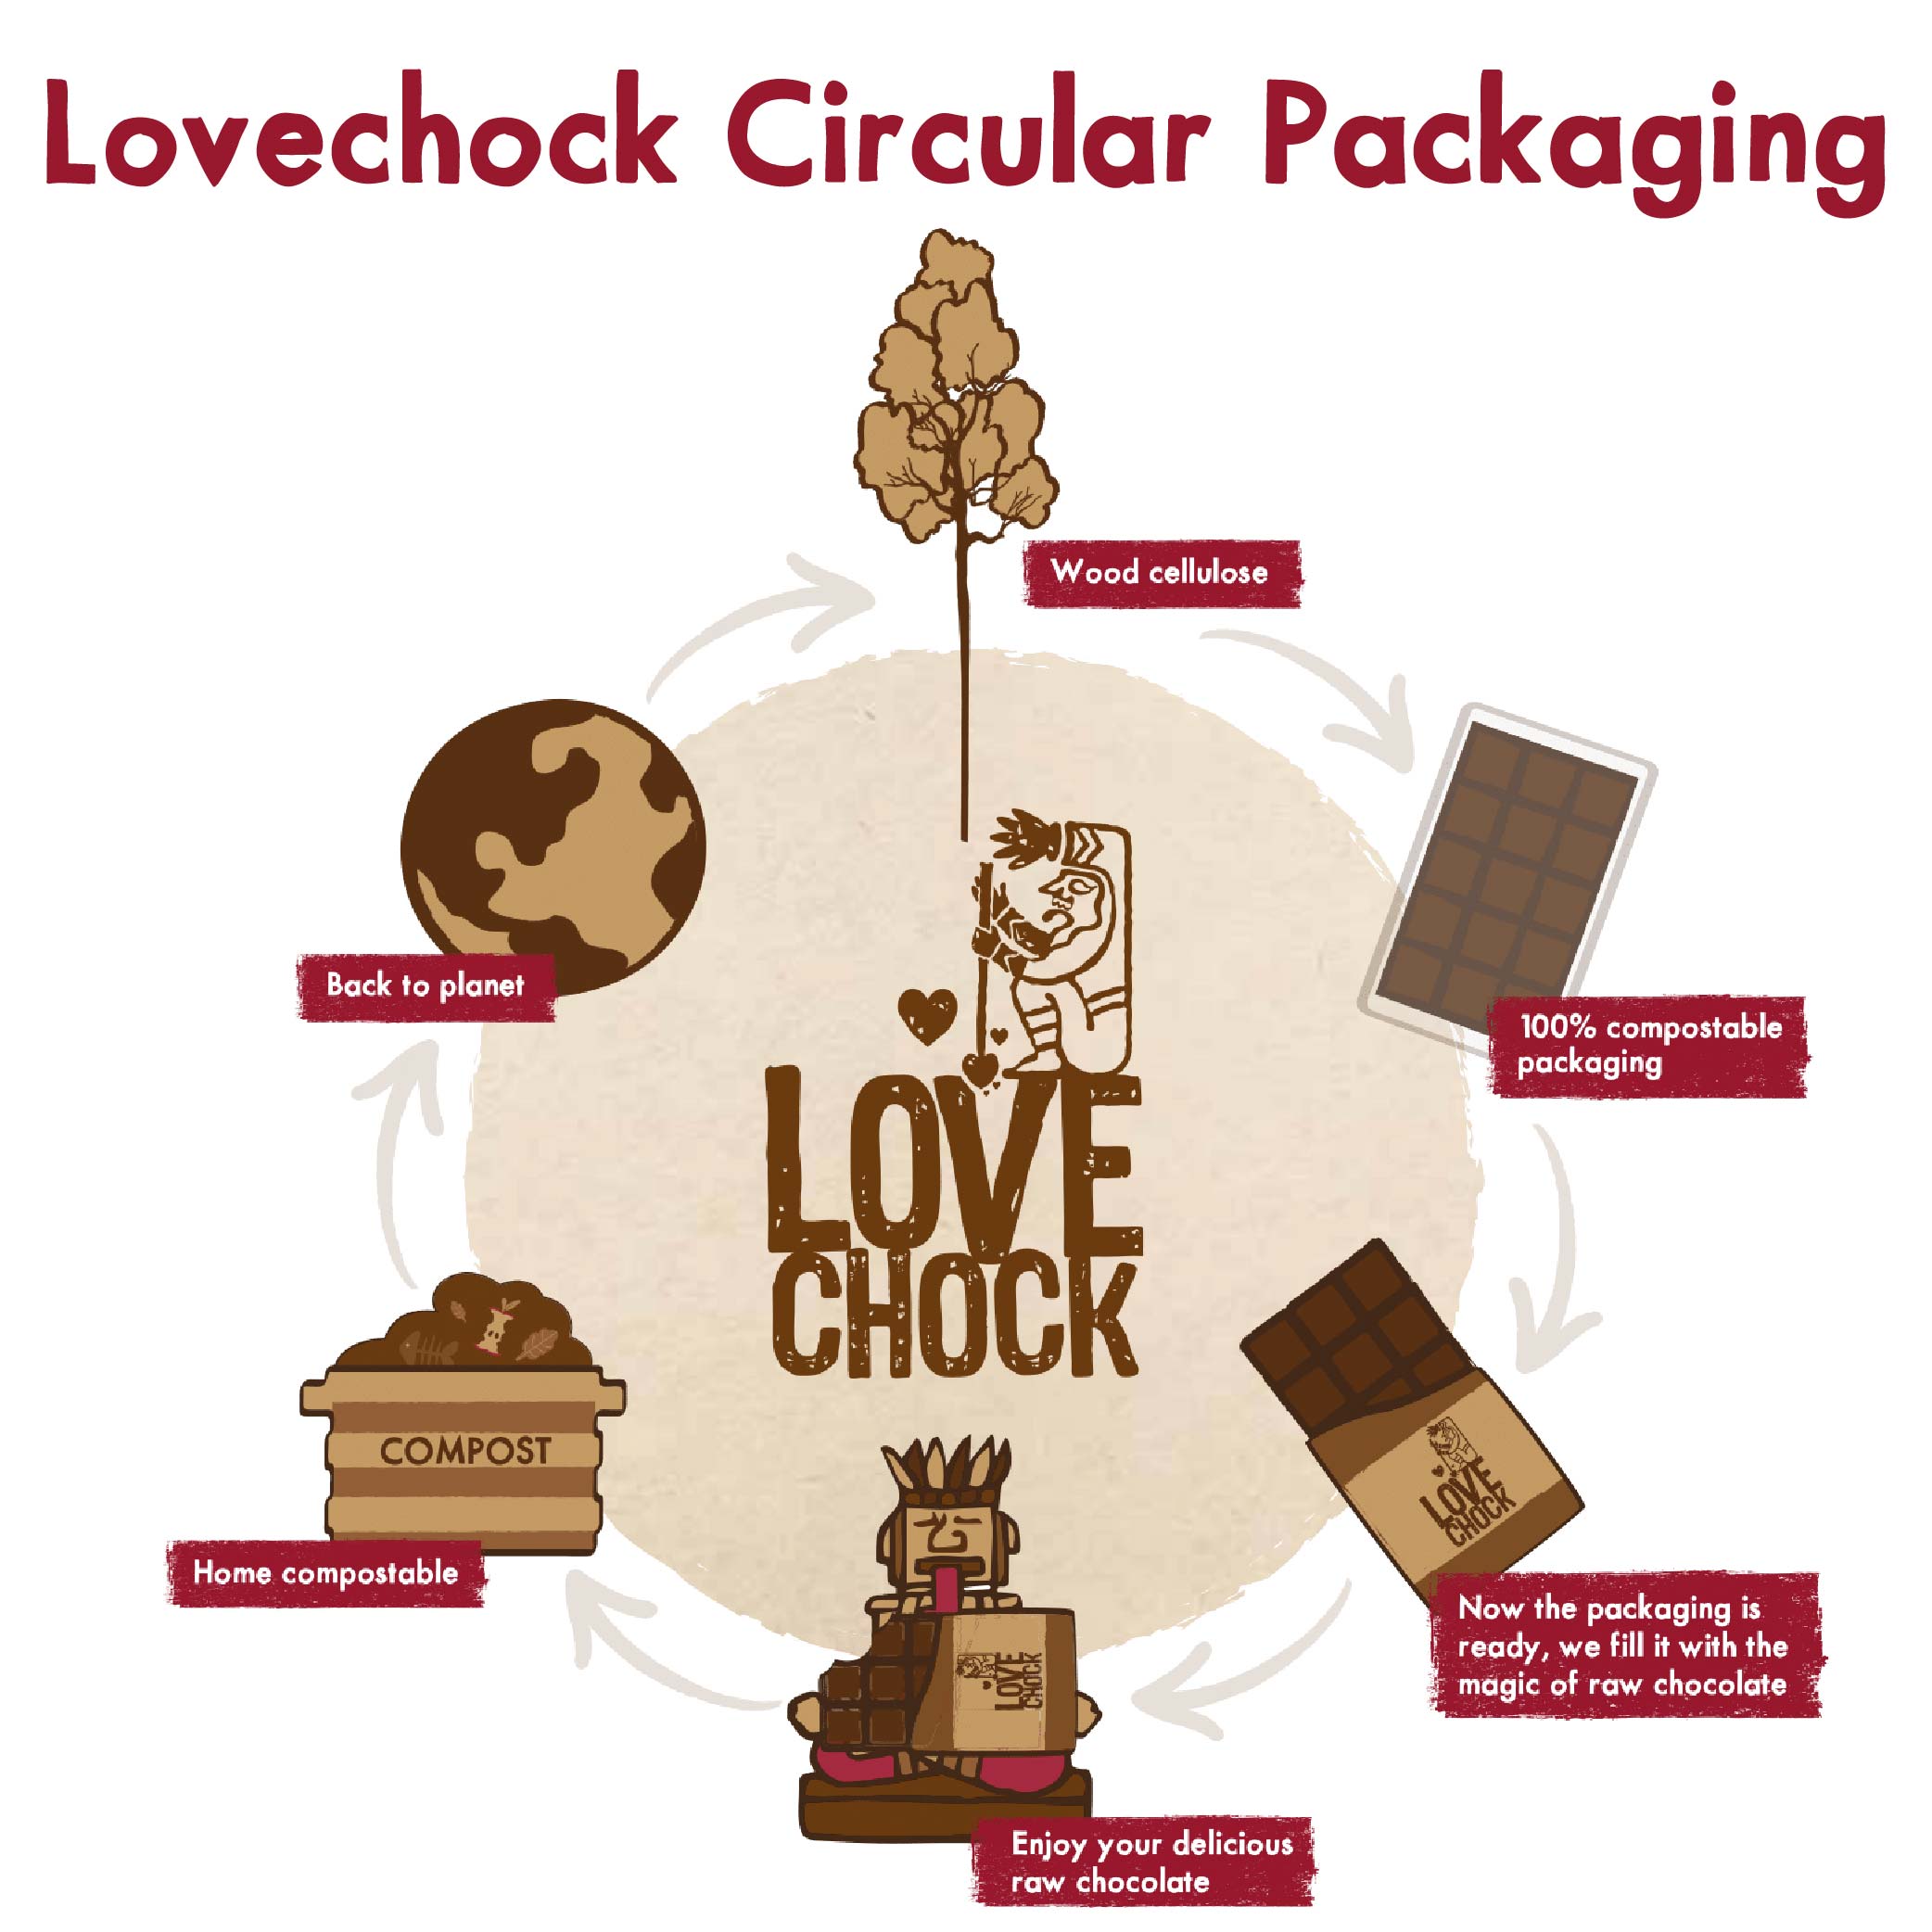 Lovechock Circular Packaging according to our Plastic Free Mission